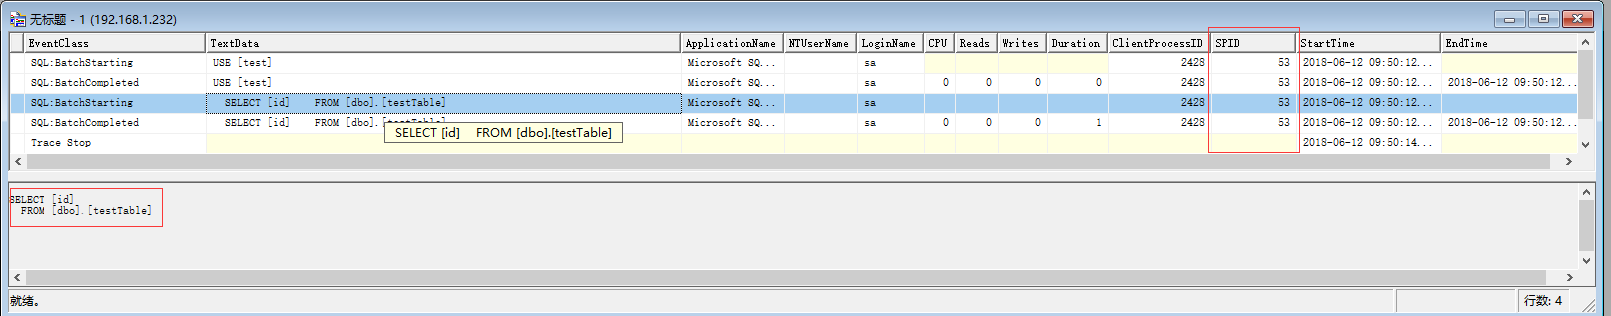 【MSSQL】How can i see what IP address made the request to SQL Server?第1张